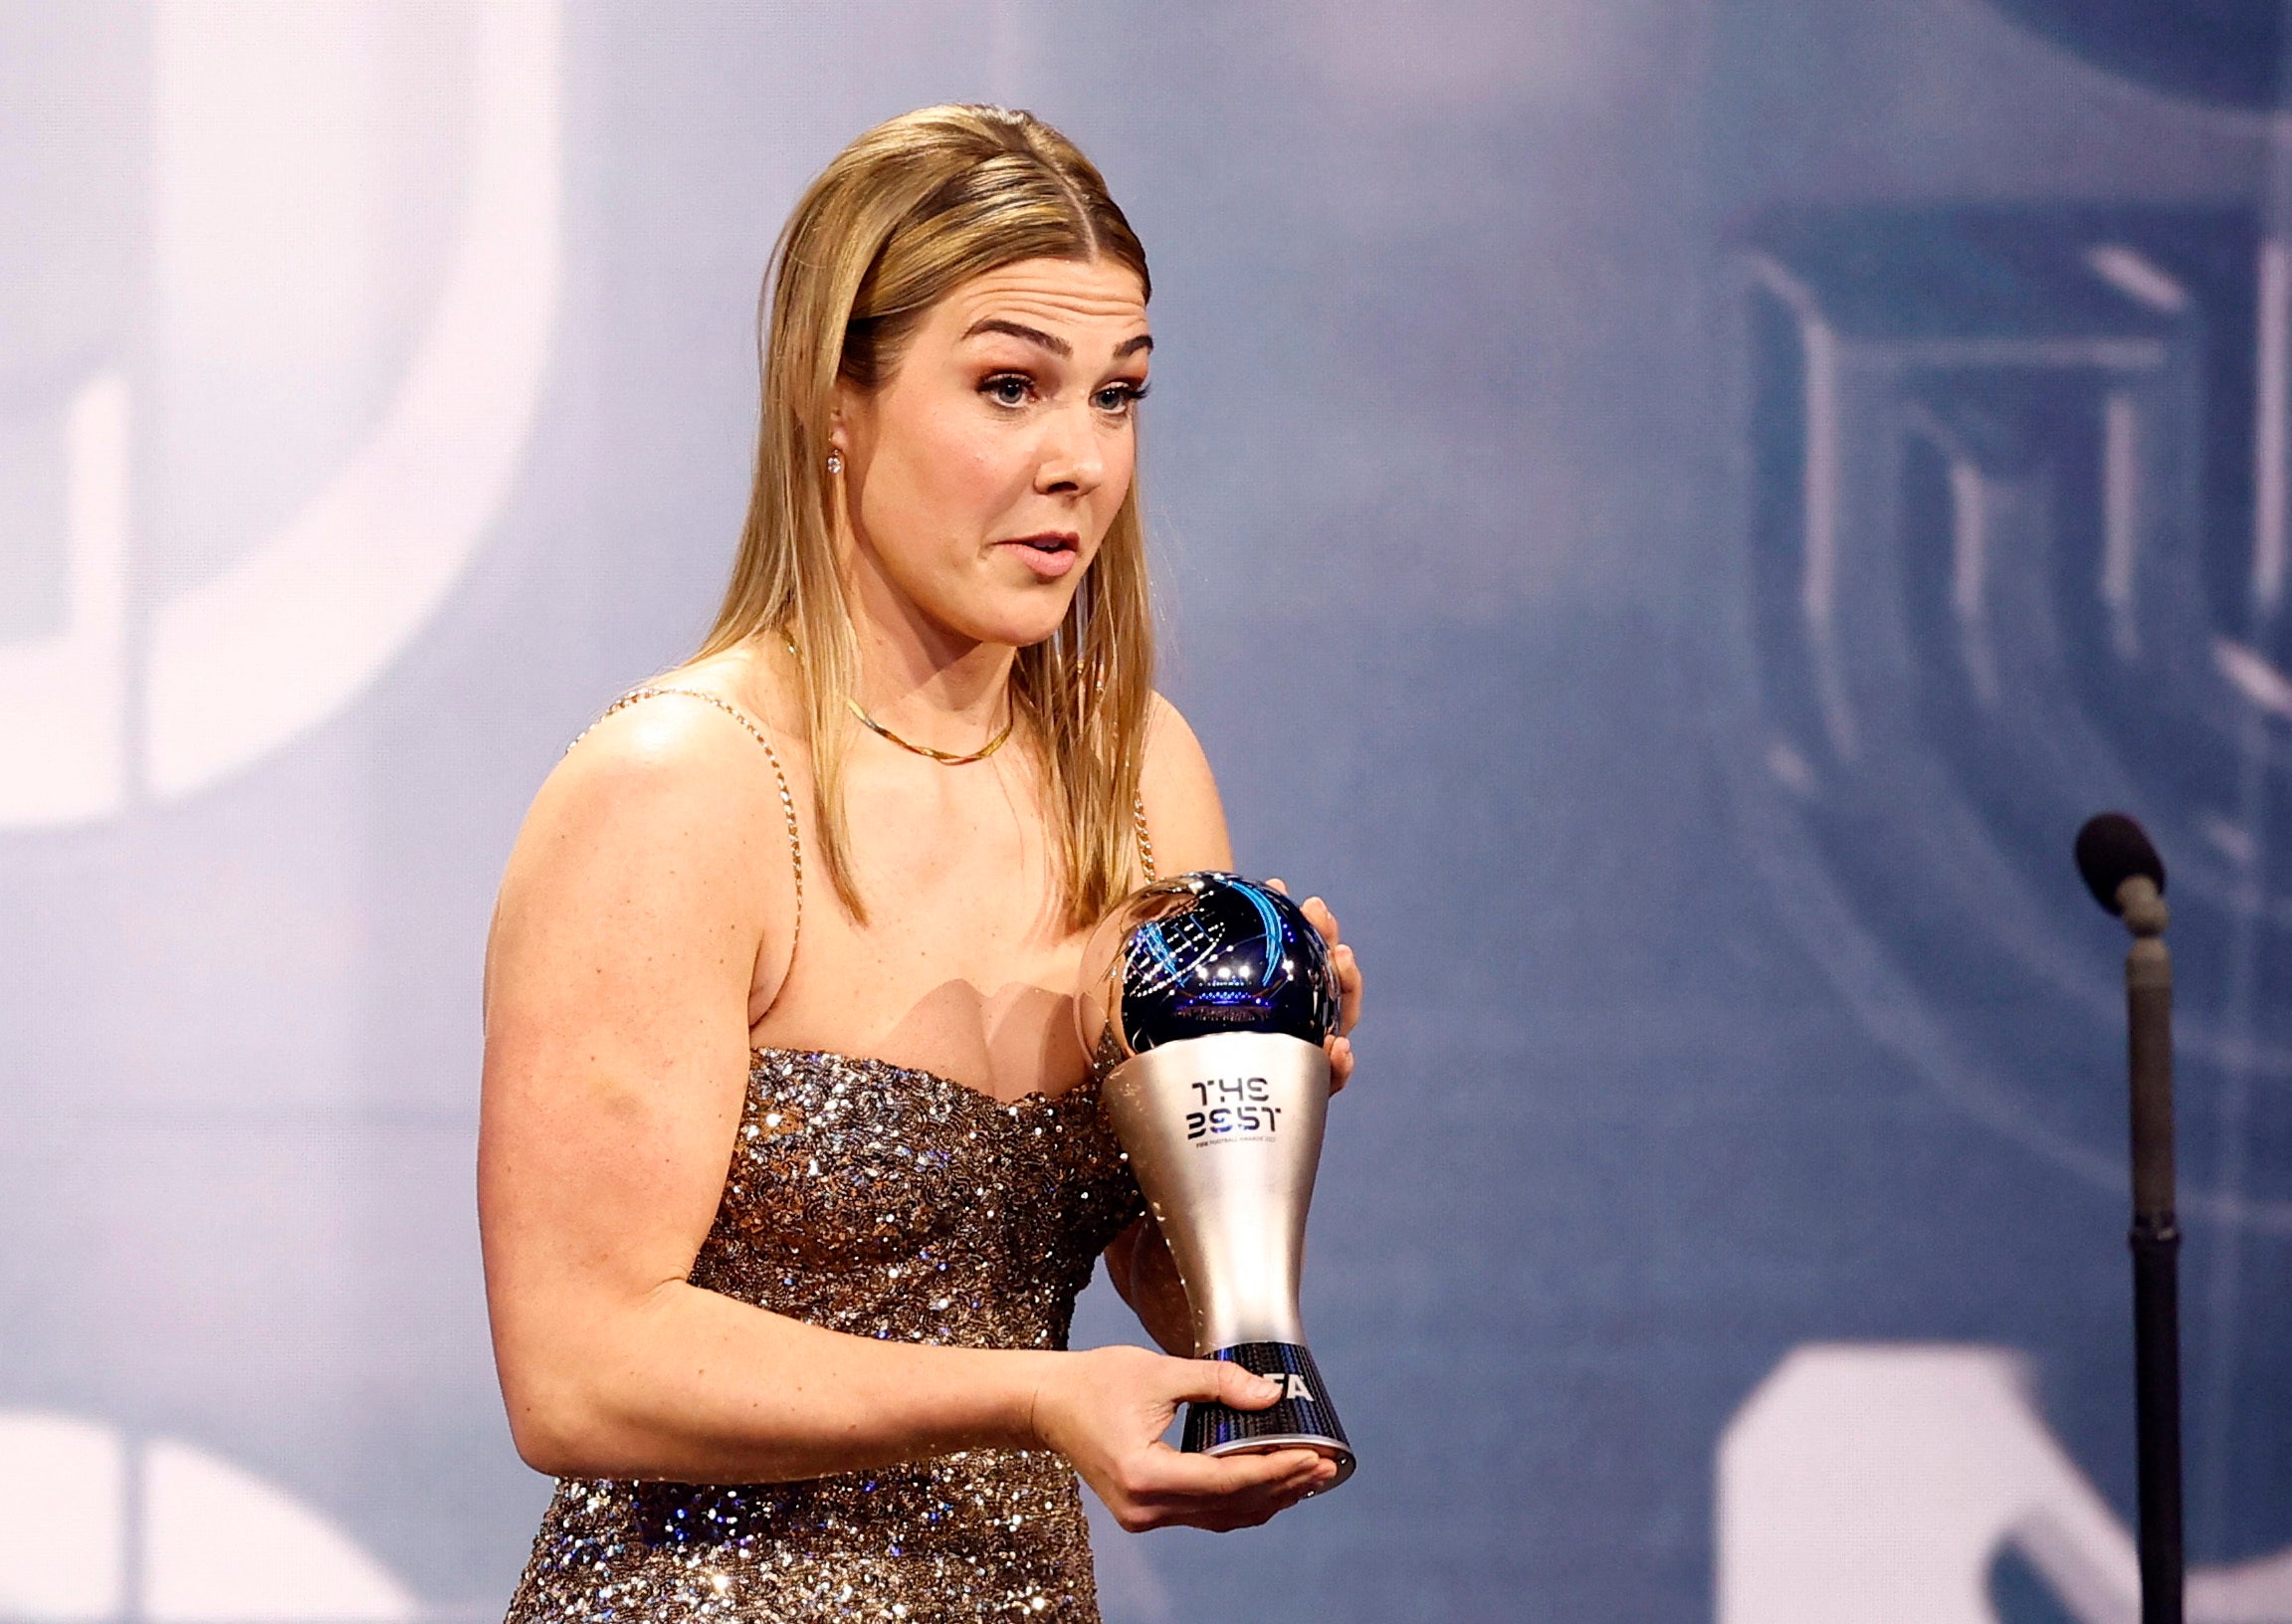 Mary Earps’ Fifa Best award is thoroughly deserved, says Manchester